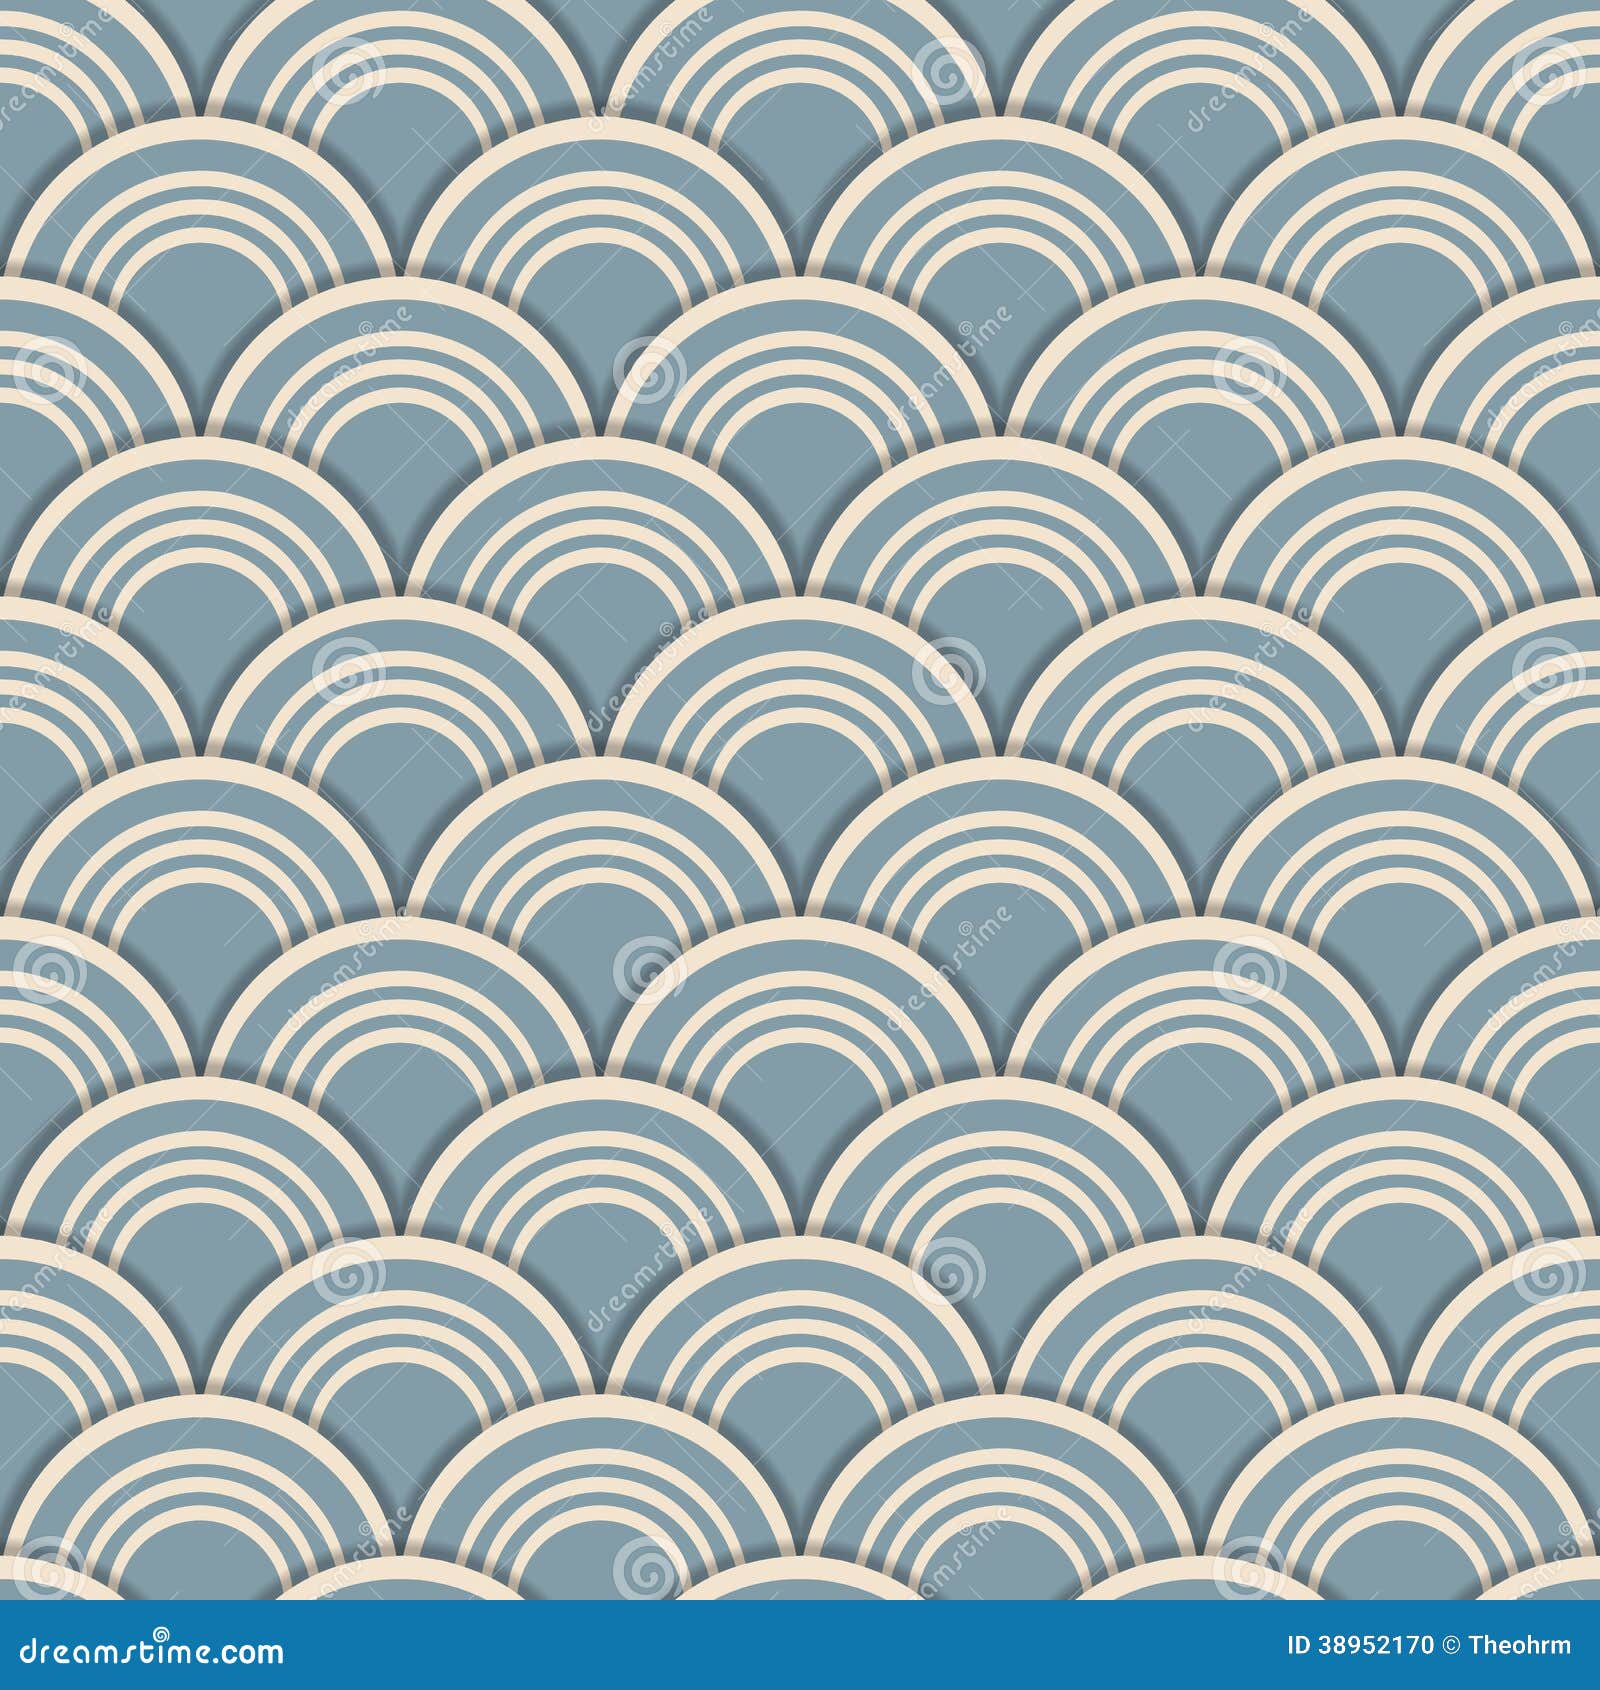 japanese style d seamless background scale tile layered effect file eps uses clipping mask transparency 38952170